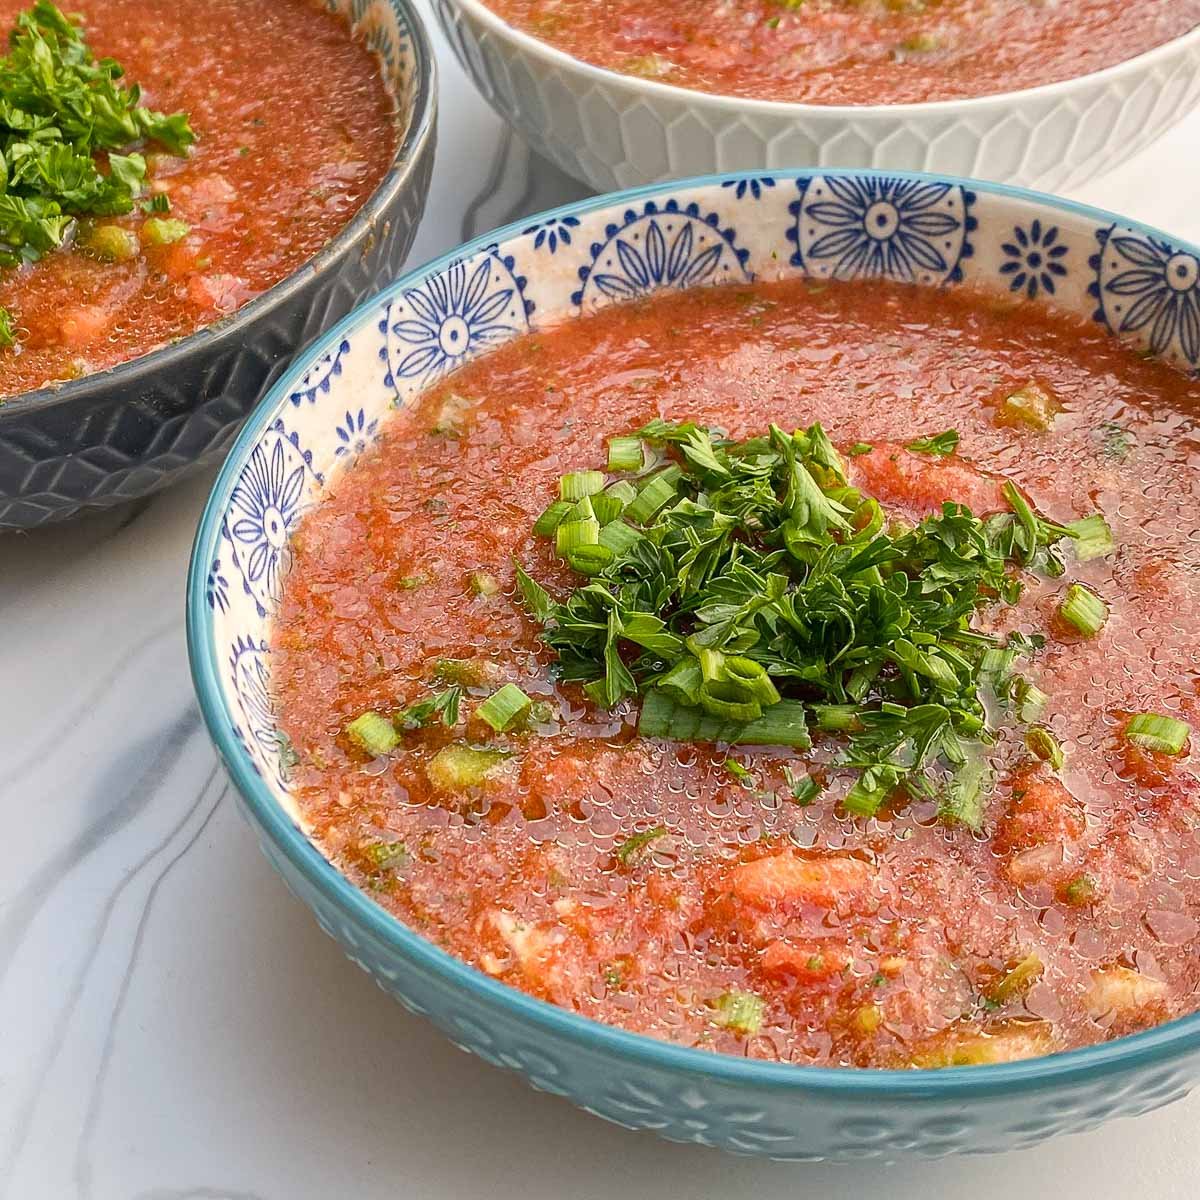 Blue bowls of gazpacho soup garnished with parsley and chives.